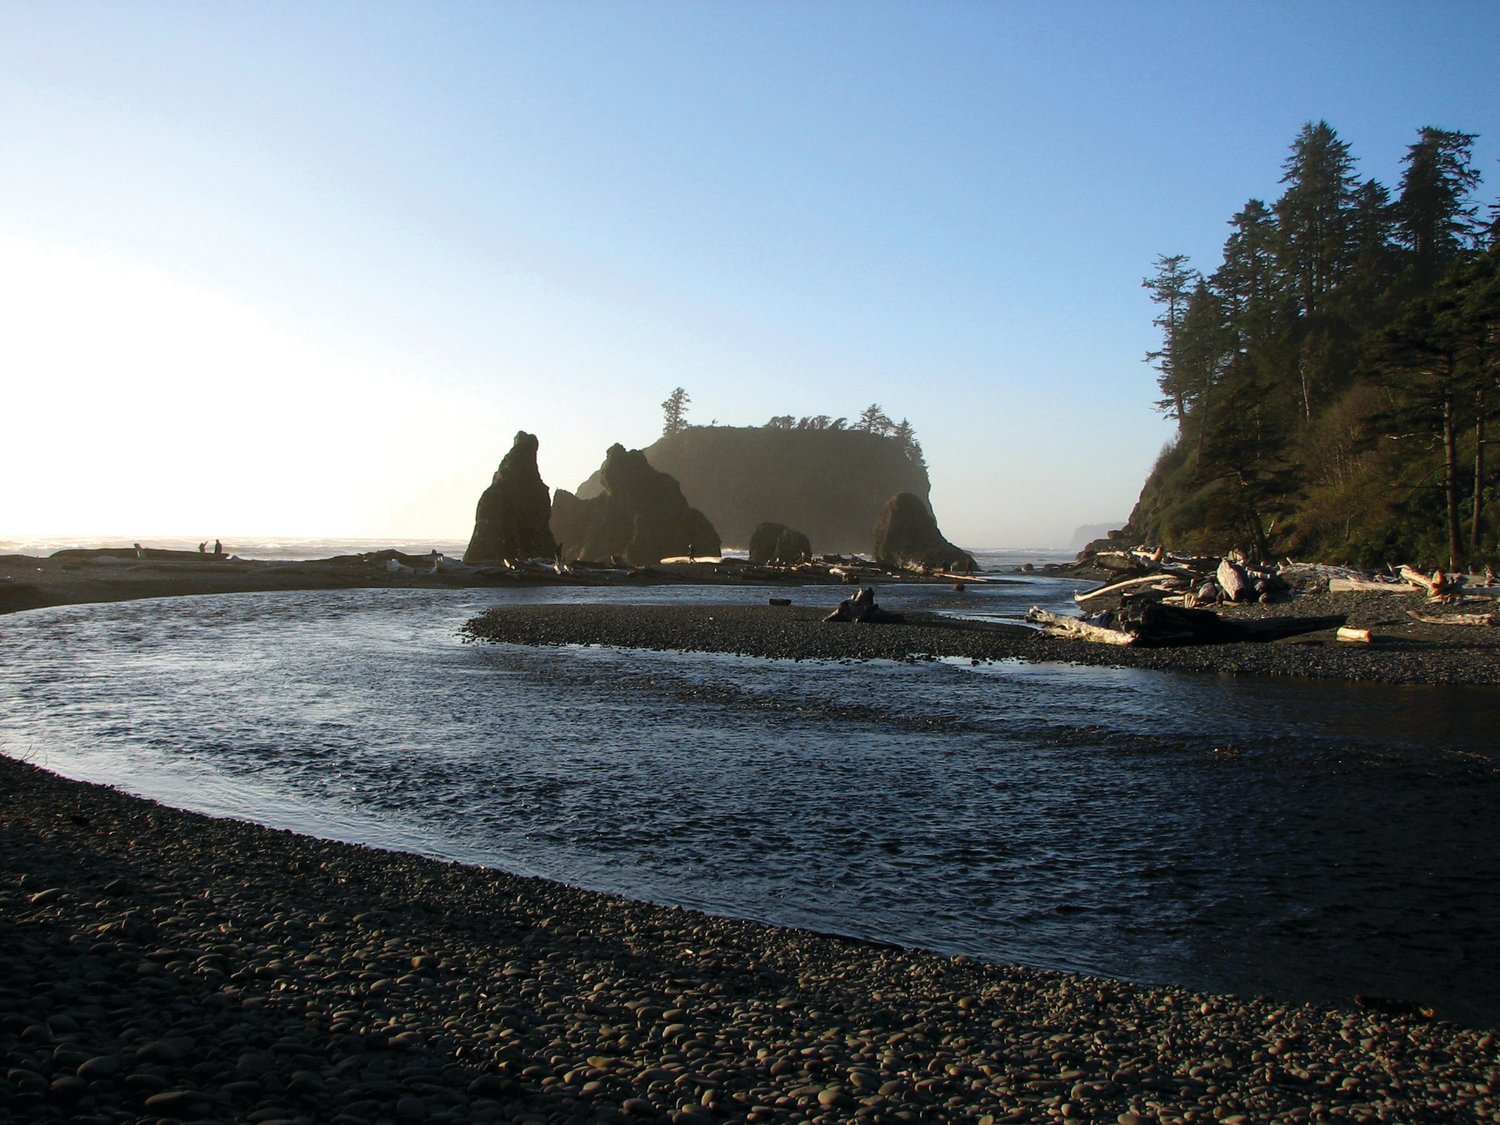 New accessibility features will allow visitors of all abilities to experience Ruby Beach, a popular destination for visitors to Olympic National Park.